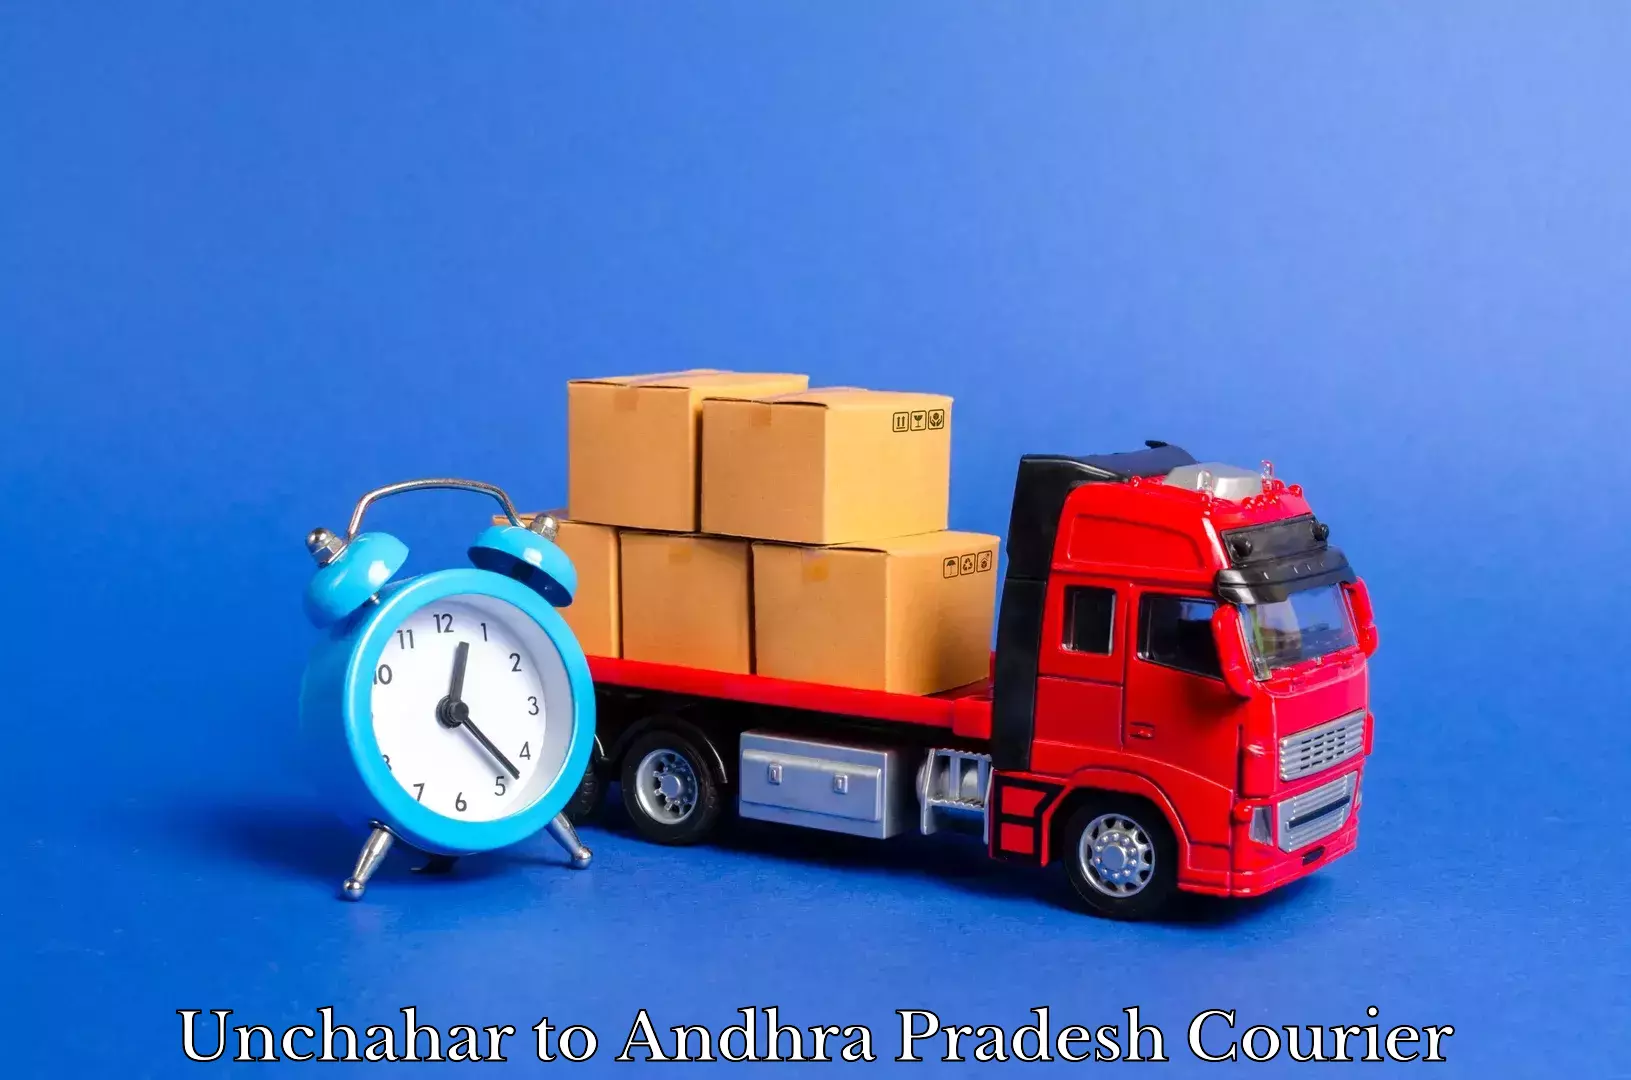 Furniture delivery service Unchahar to Chintapalli